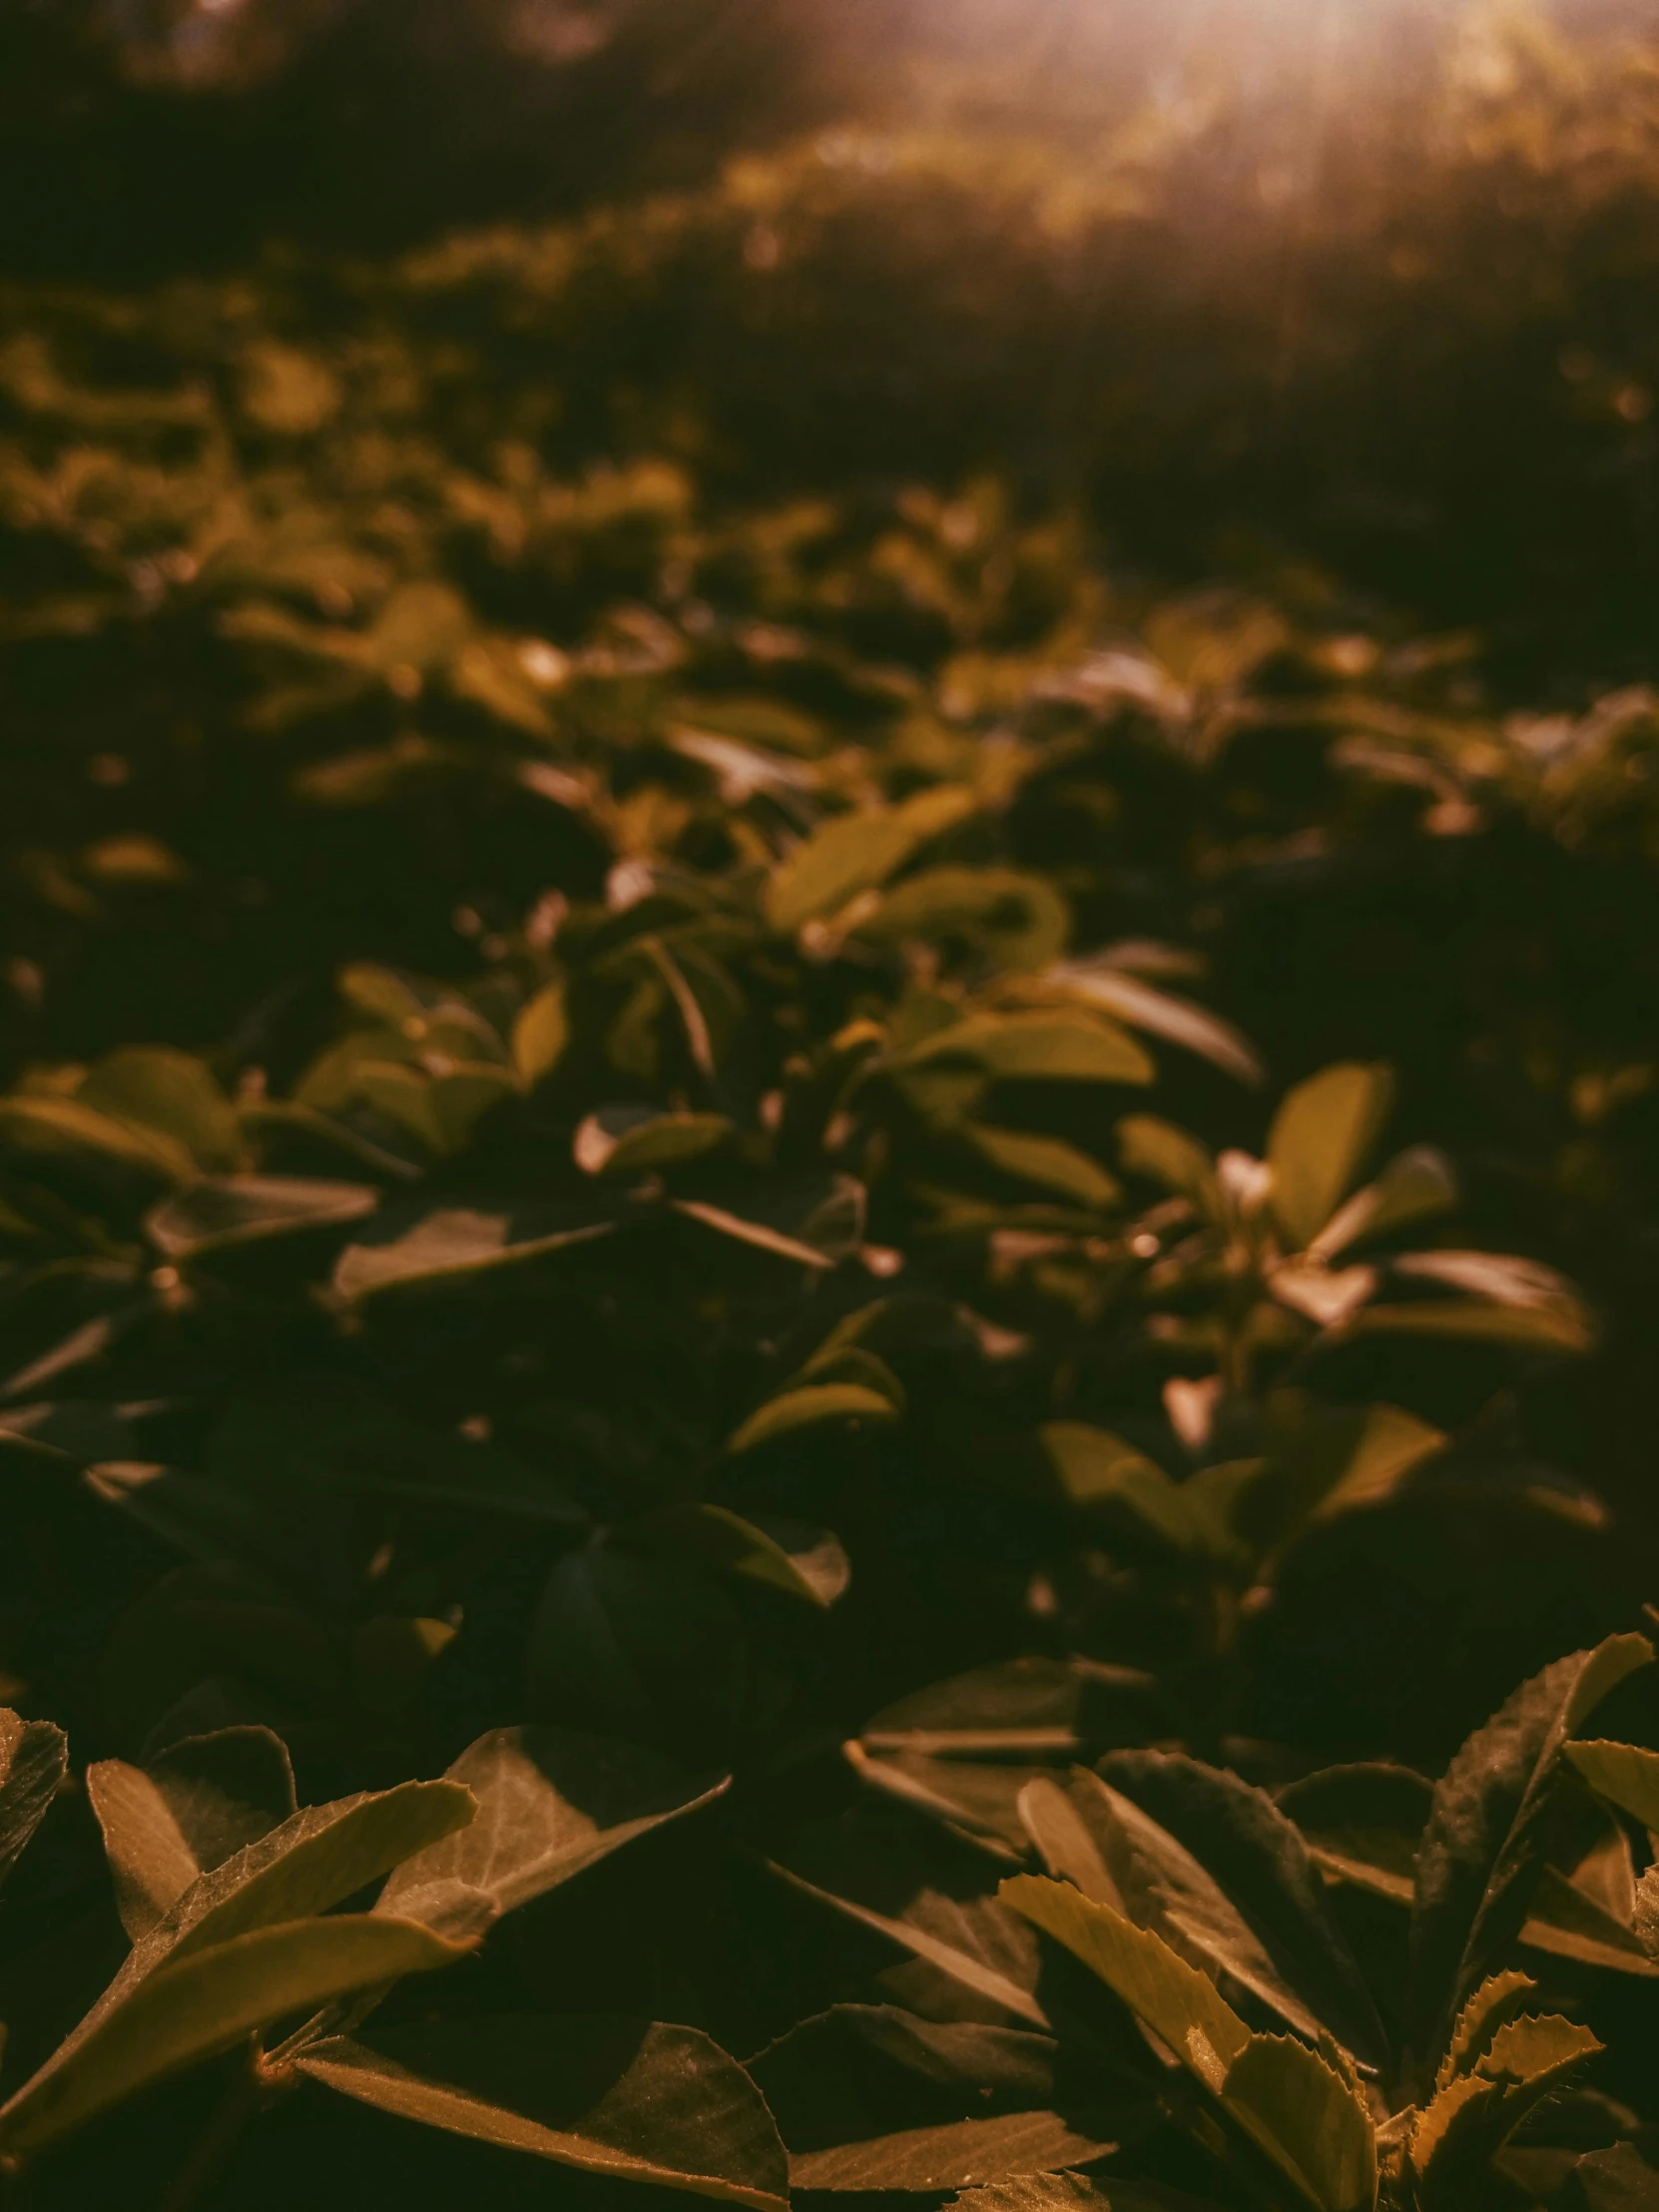 a field full of green plants with the sun in the background, an album cover, trending on unsplash, tonalism, dark golden light night, background: assam tea garden, lo - fi colors, 3 5 mm close up